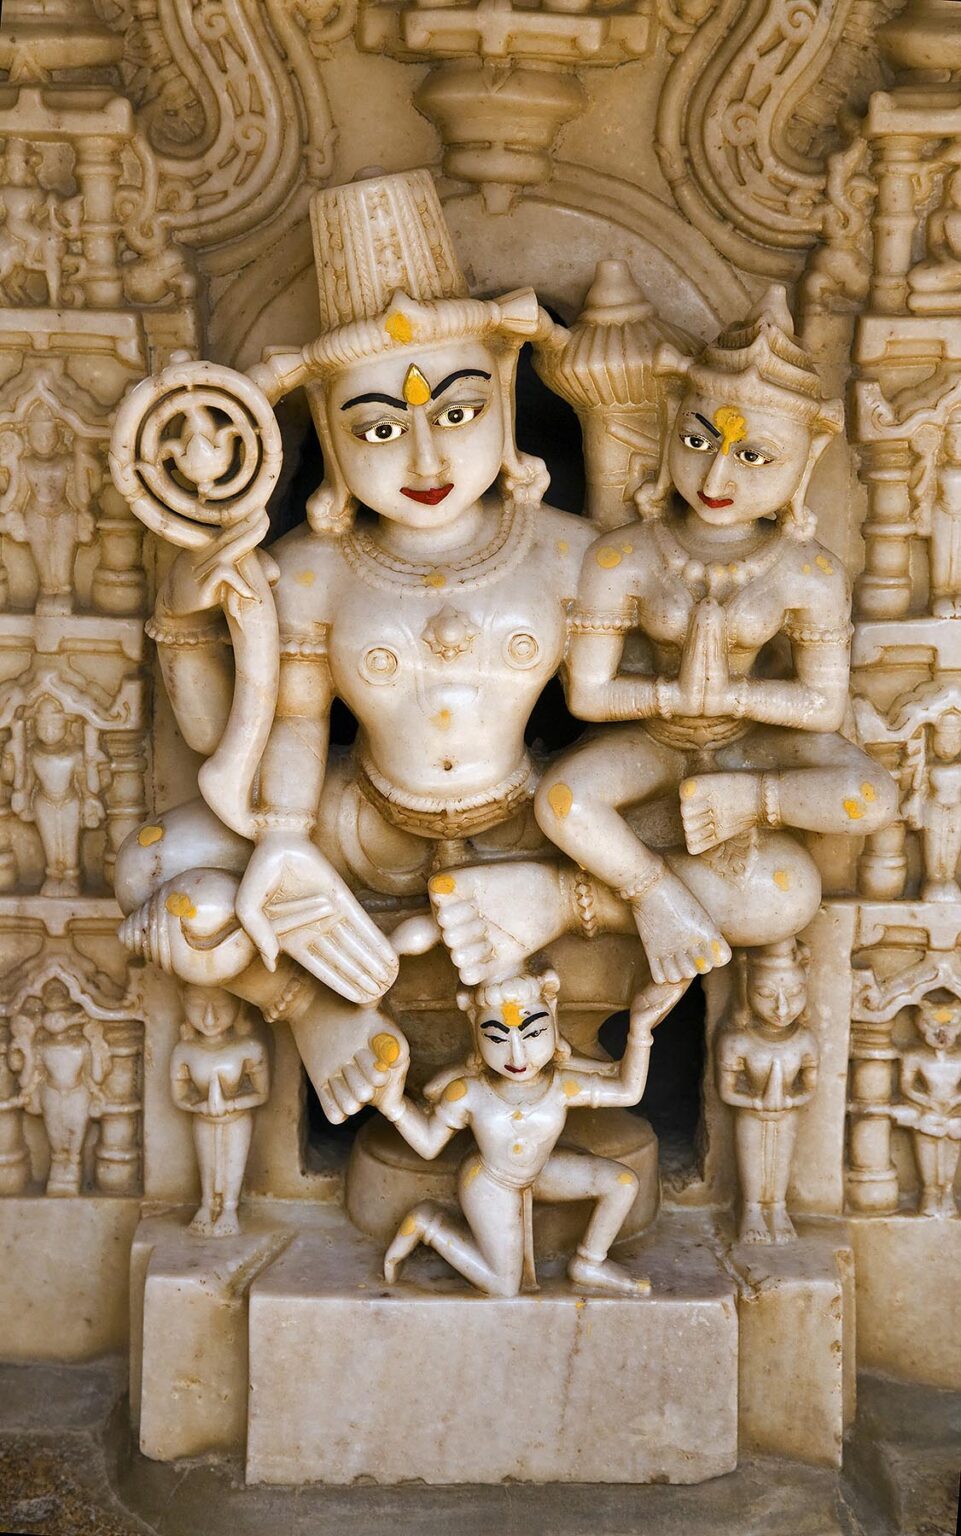 Unusual WHITE MARBLE SHIVA AND PARVATI in an ancient JAIN TEMPLE inside JAISALMER FORT - RAJASTHAN, INDIA